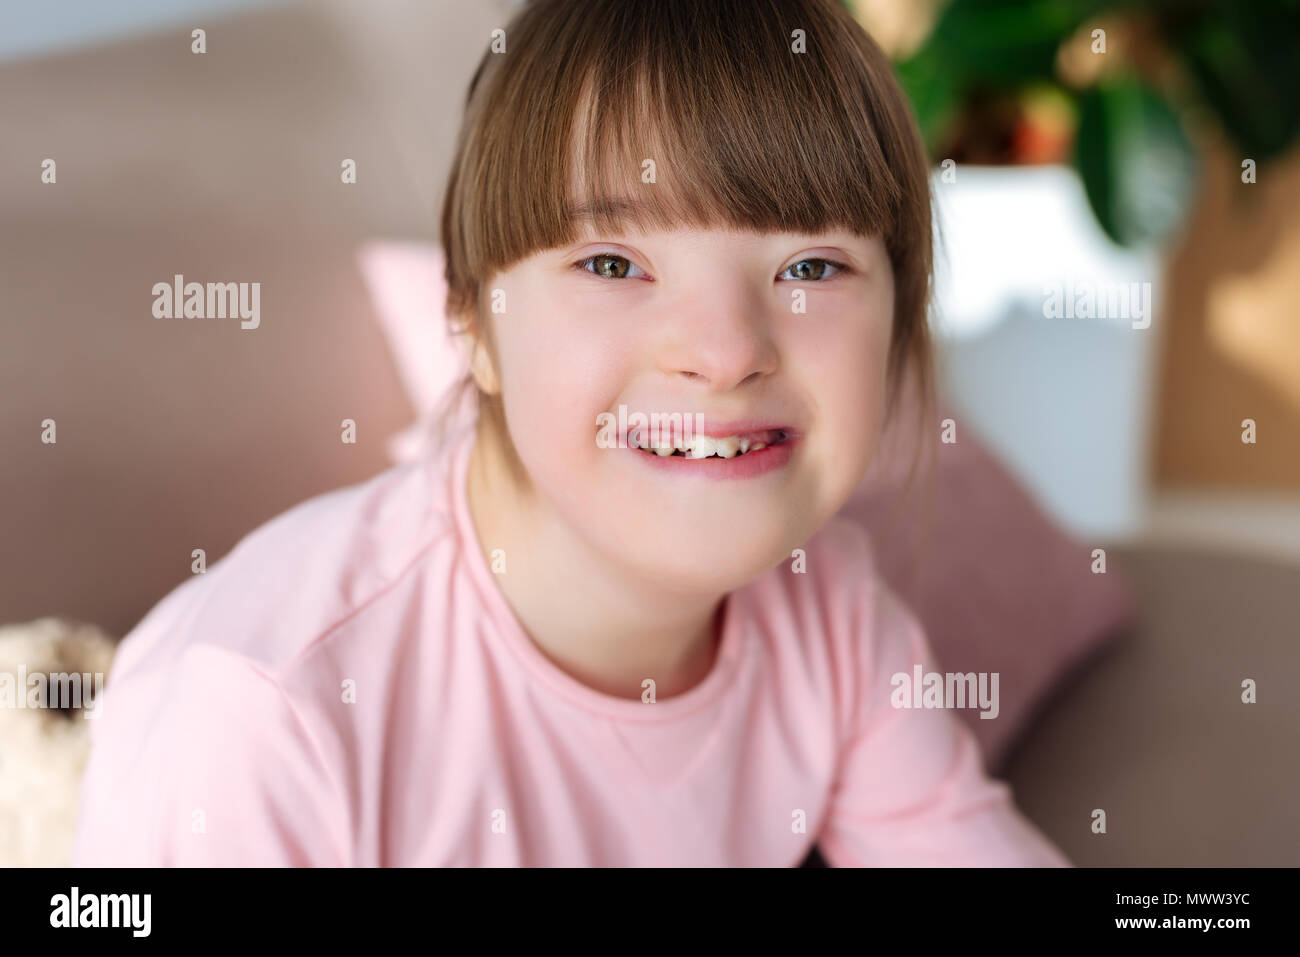 Portrait of happy child with down syndrome Stock Photo